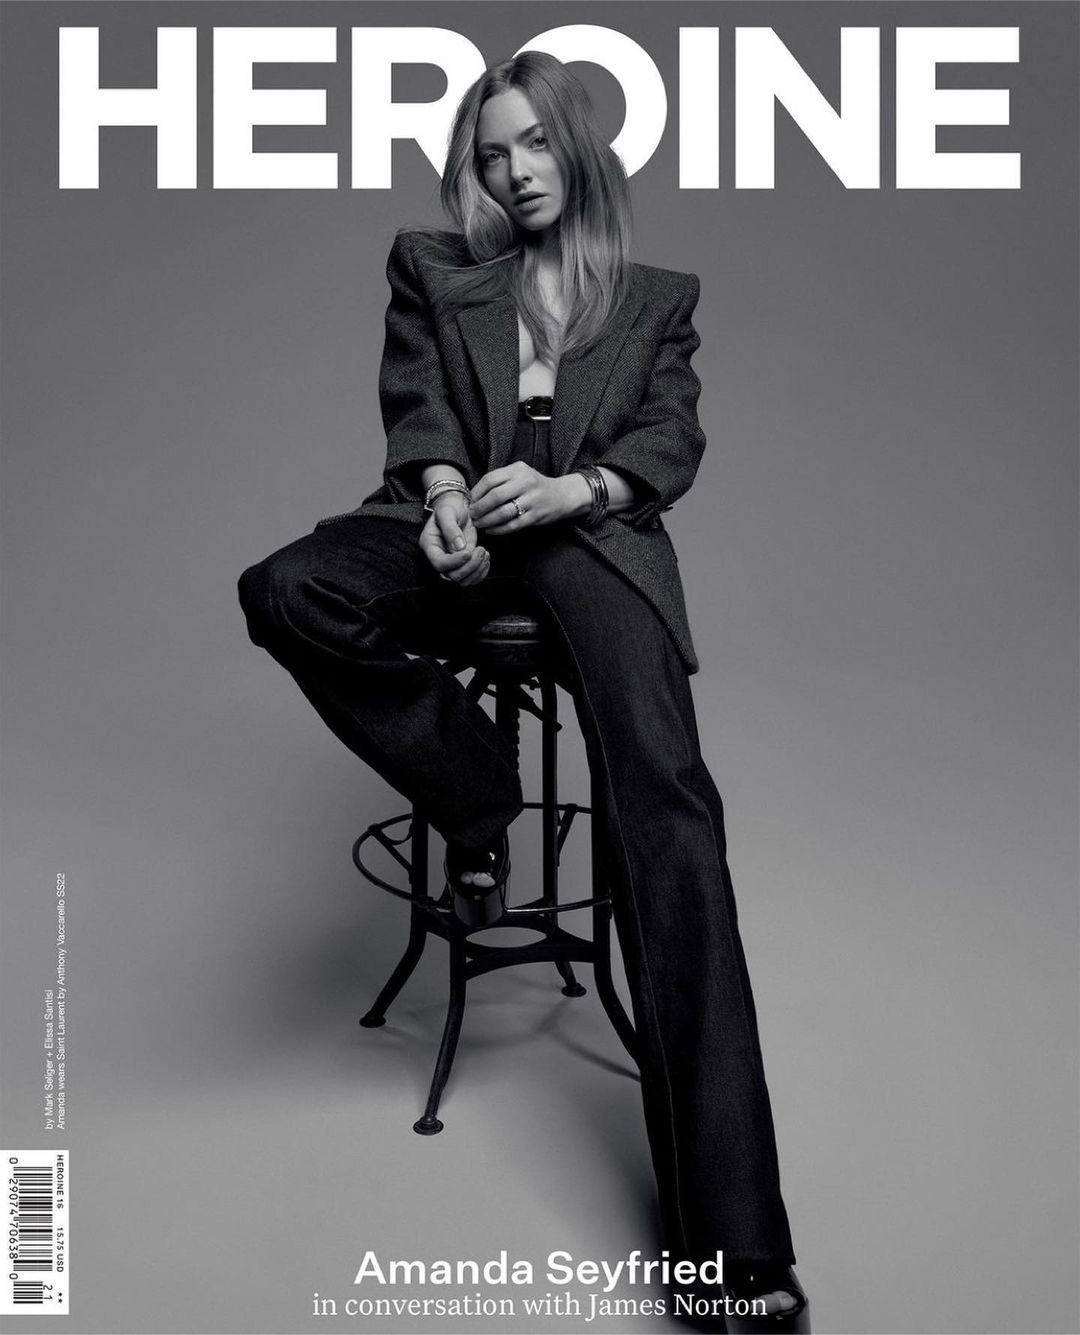 ????‍♀️ Repost from @heroine_mag
•
Amanda Seyfried on the cover of the new issue, REINVENT⁠
⁠
It’s Amanda Seyfried, but virtually unrecognisable [for The Dropout]. Jutted jaw, hunched, stompy walk, untamed hair and unnerving accent. A complete transformation without prosthetics or CGI, just good, old-fashioned, well-researched, exquisitely executed acting...⁠
⁠
In conversation with fellow actor James Norton, Seyfried discusses her incredible transformation for her brilliant portrayal of biotech fraudster Elizabeth Holmes in acclaimed series, The Dropout. ⁠
⁠
Photography @markseliger ⁠
Fashion @elissasantisi ⁠
Hair @akkishirakawa ⁠
Make-up @rieomoto ⁠
Manicurist @ohmynailsnyc⁠
Creative Producer @gallerycoco ⁠
⁠
@artpartner @thewallgroup ⁠